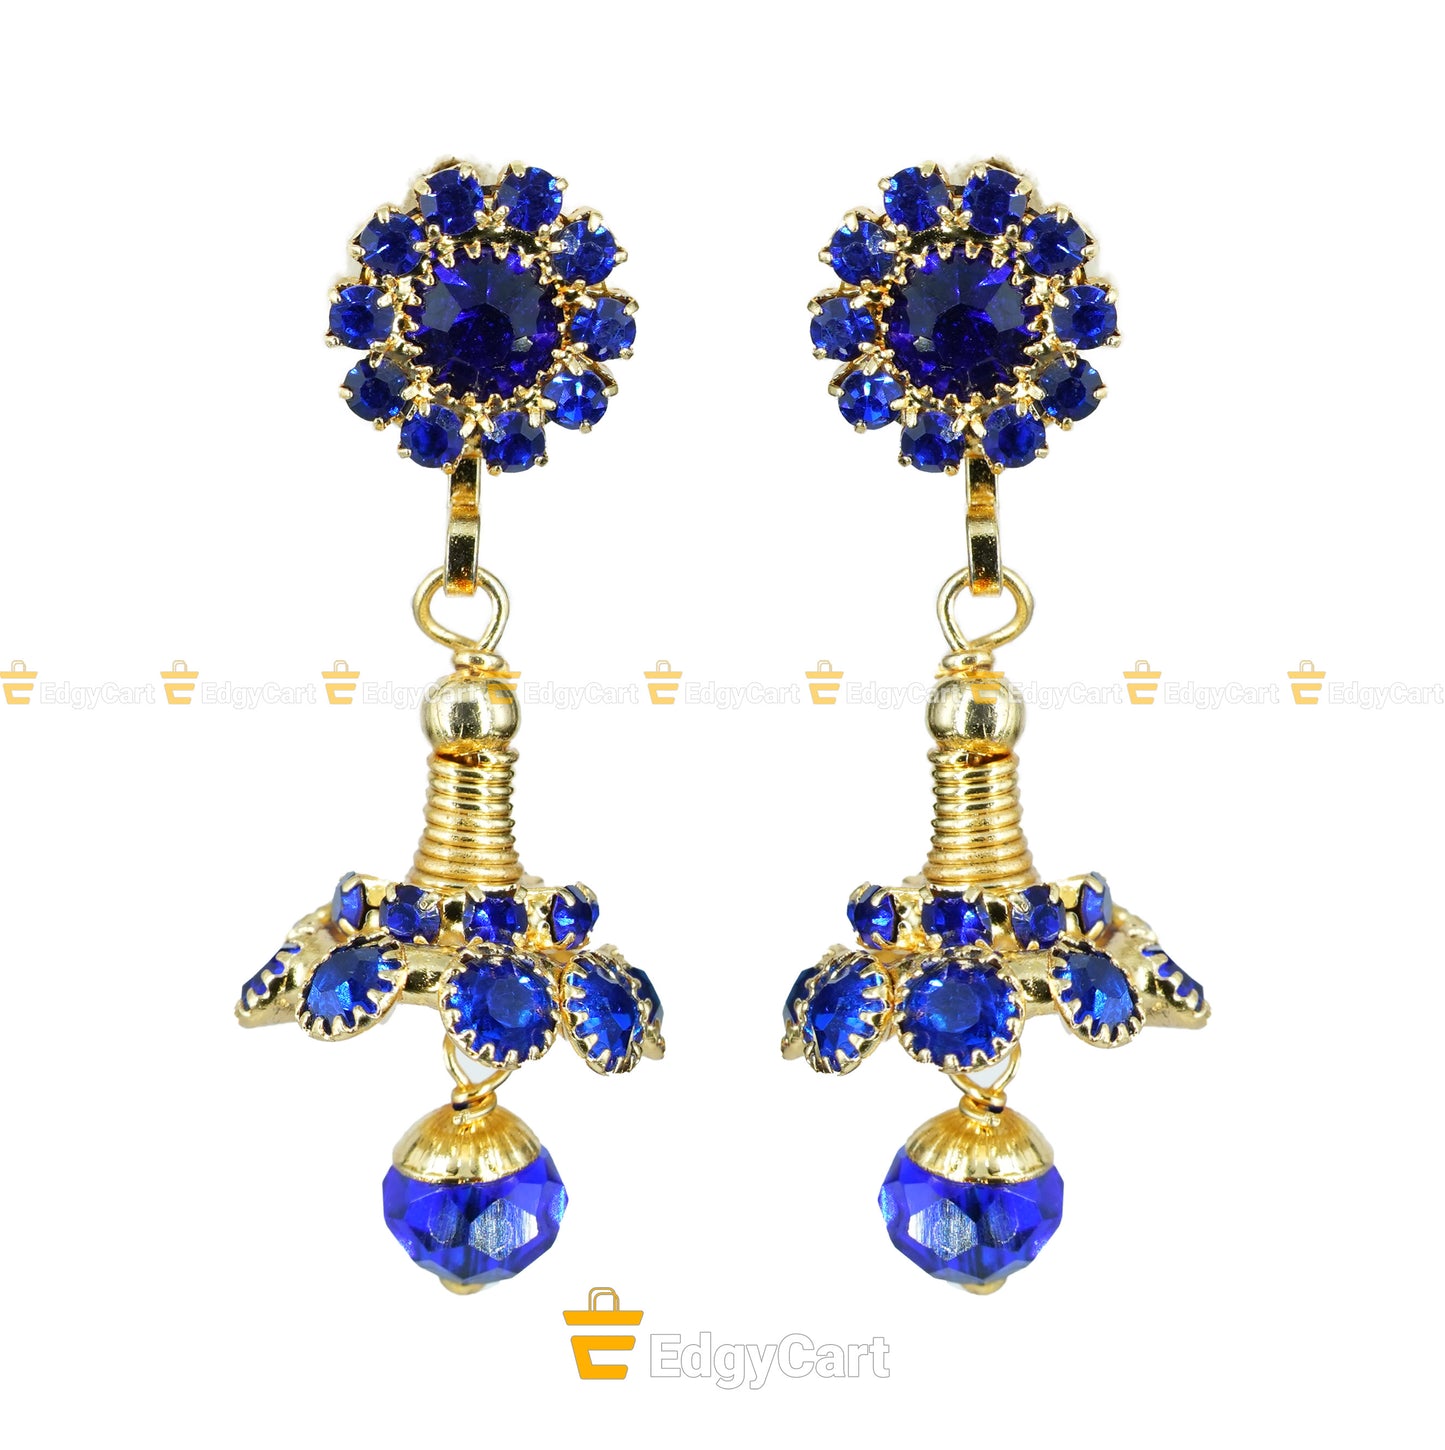 Floral Drop Earrings with hanging